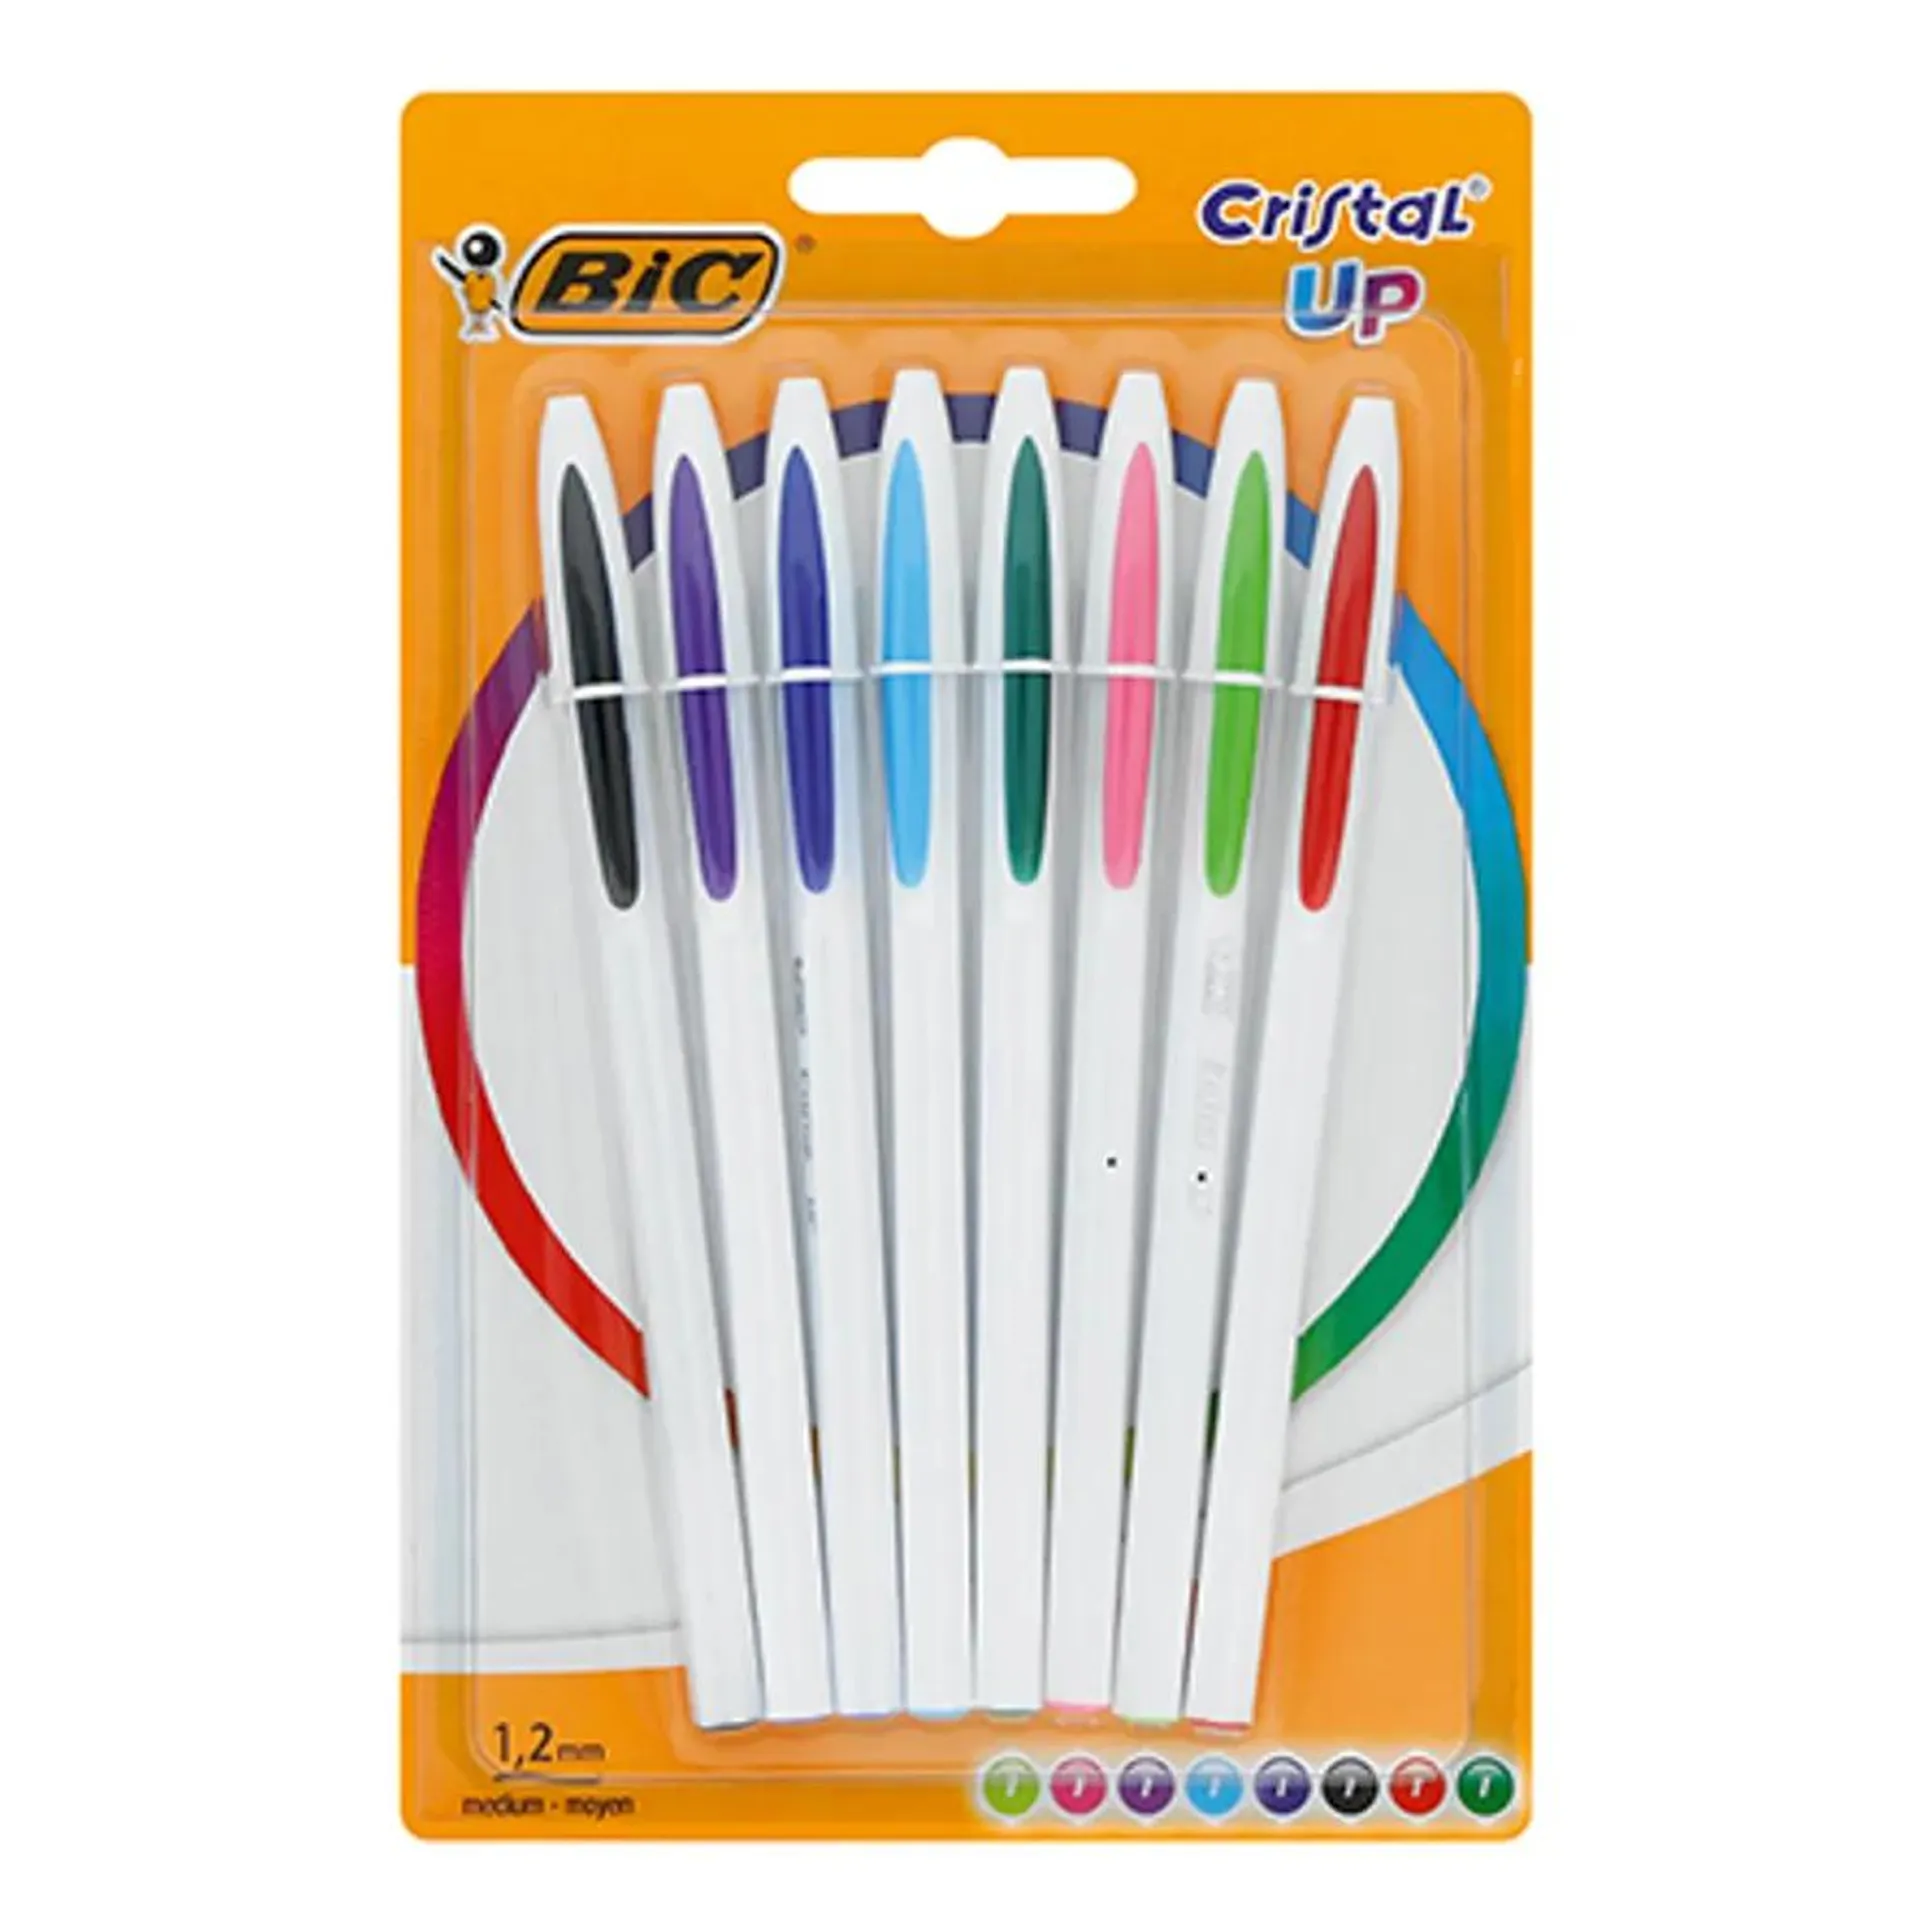 Cristal-Up Ballpoint Pens - 1.2mm - Assorted - 8 Pack